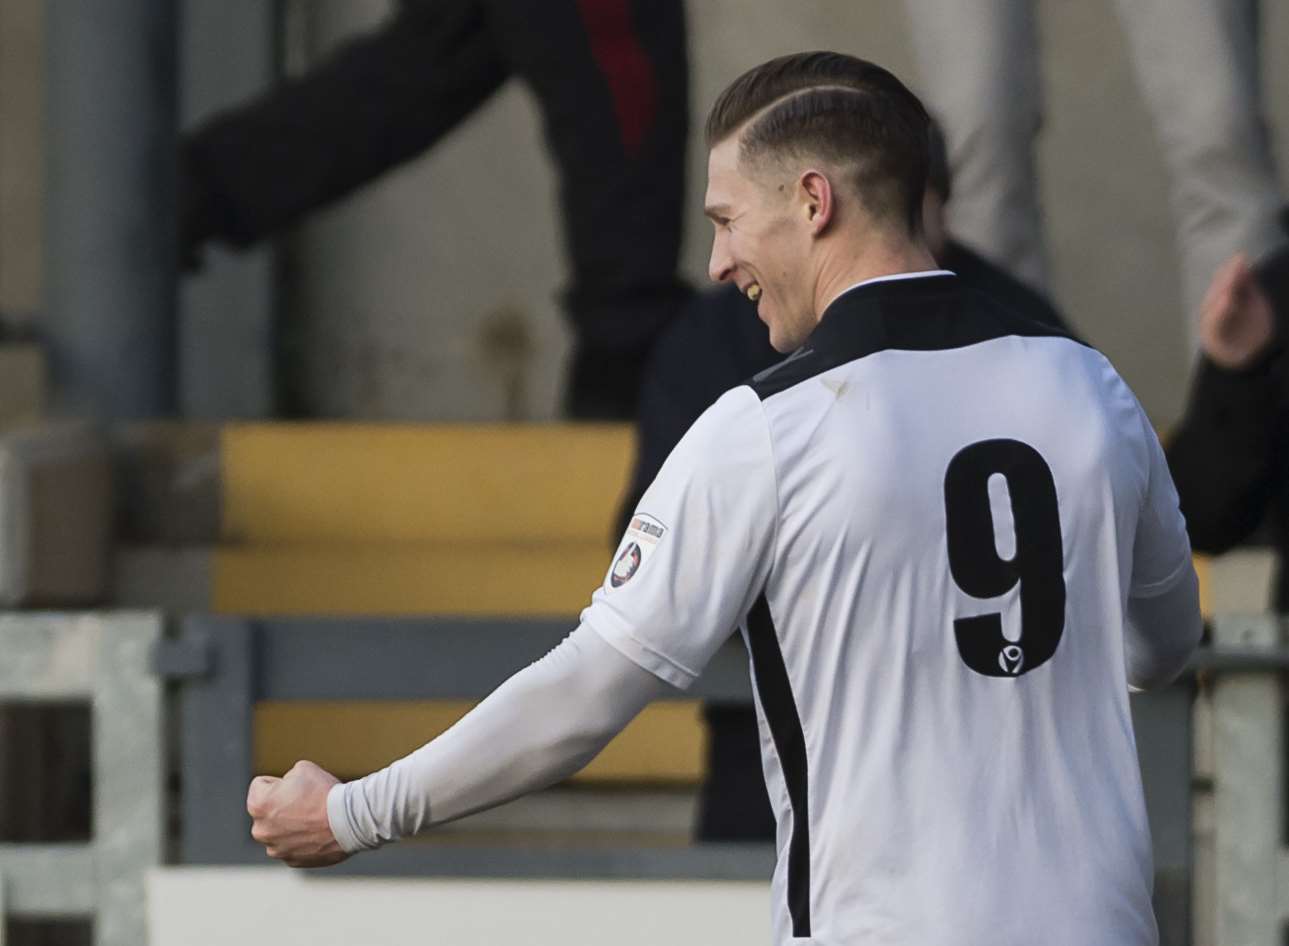 Andy Pugh scored twice in Dartford's 4-1 win over Bath City Picture: Andy Payton